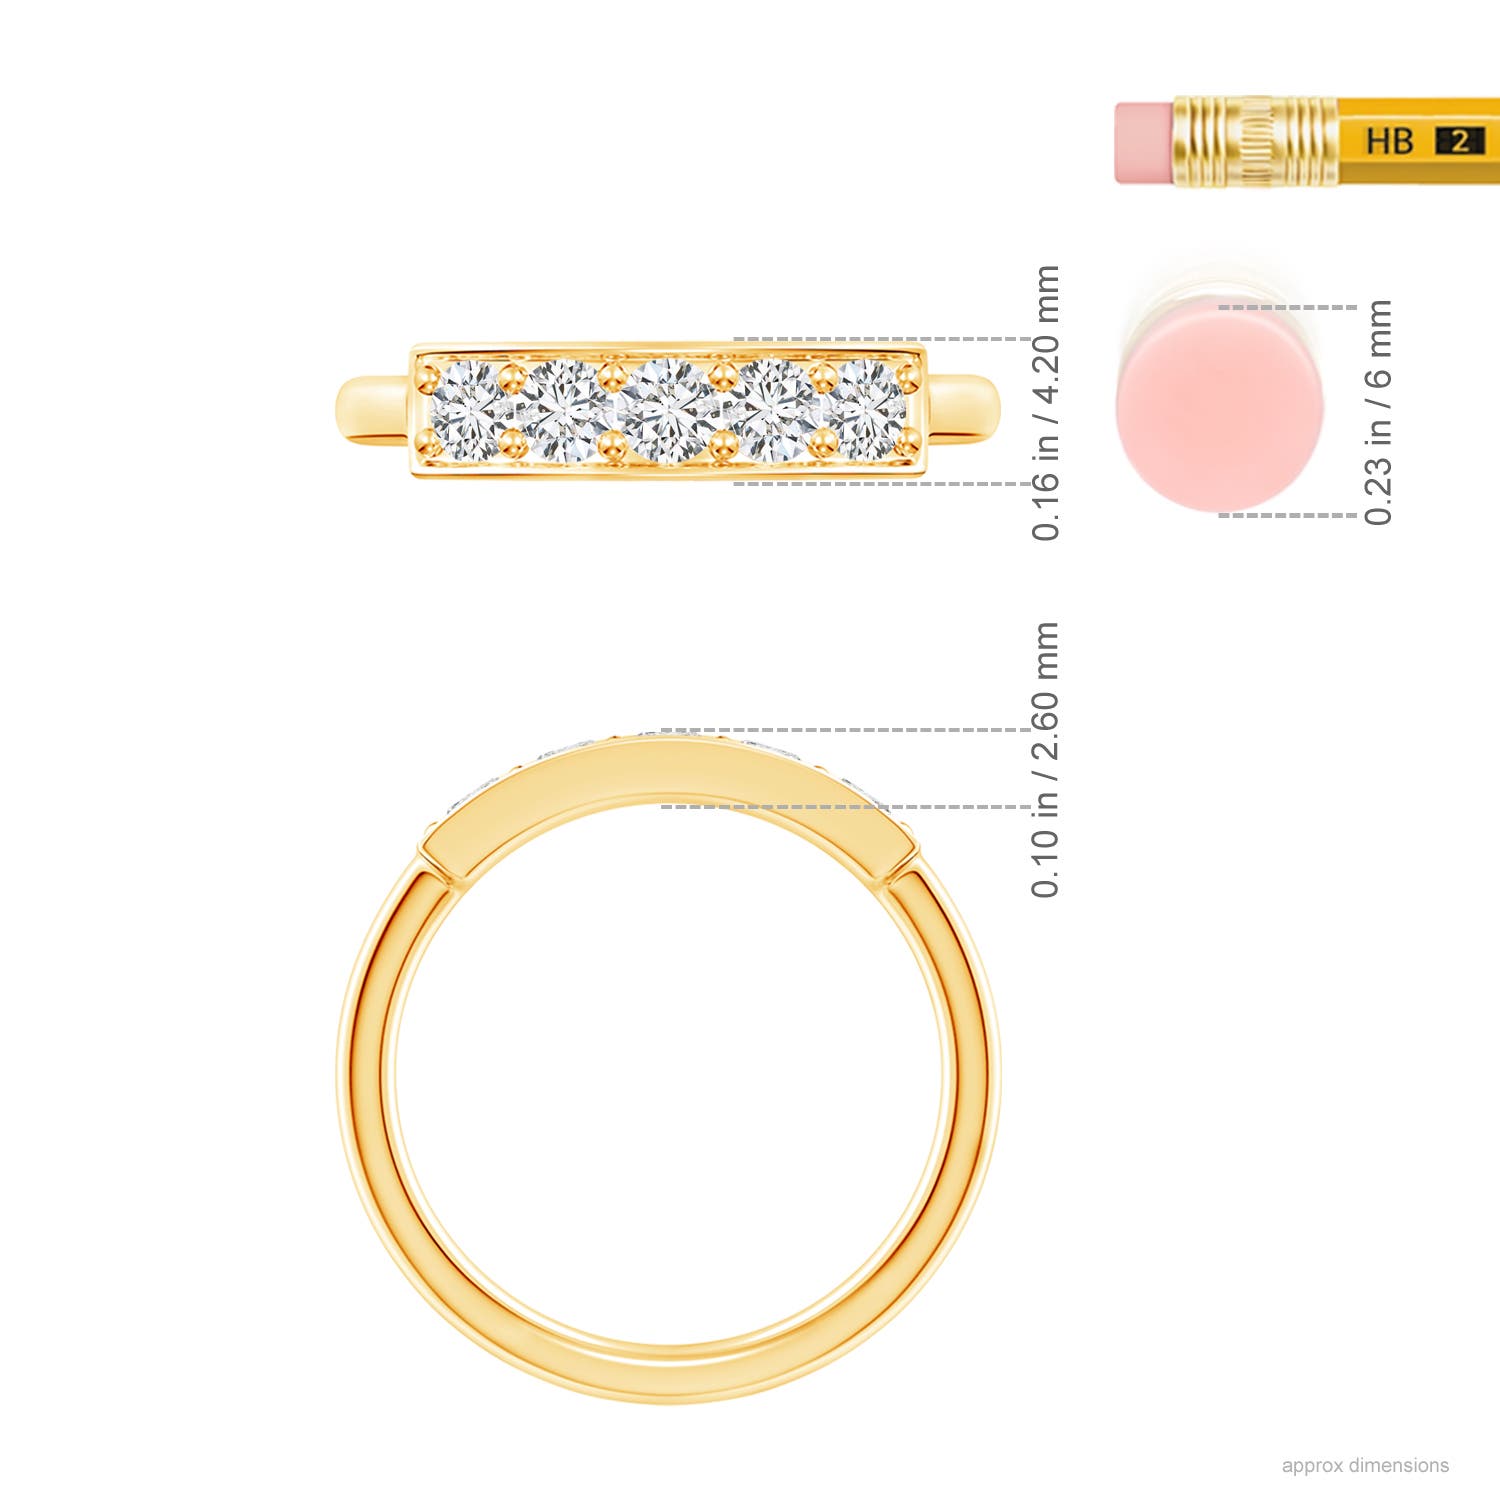 H, SI2 / 0.53 CT / 14 KT Yellow Gold